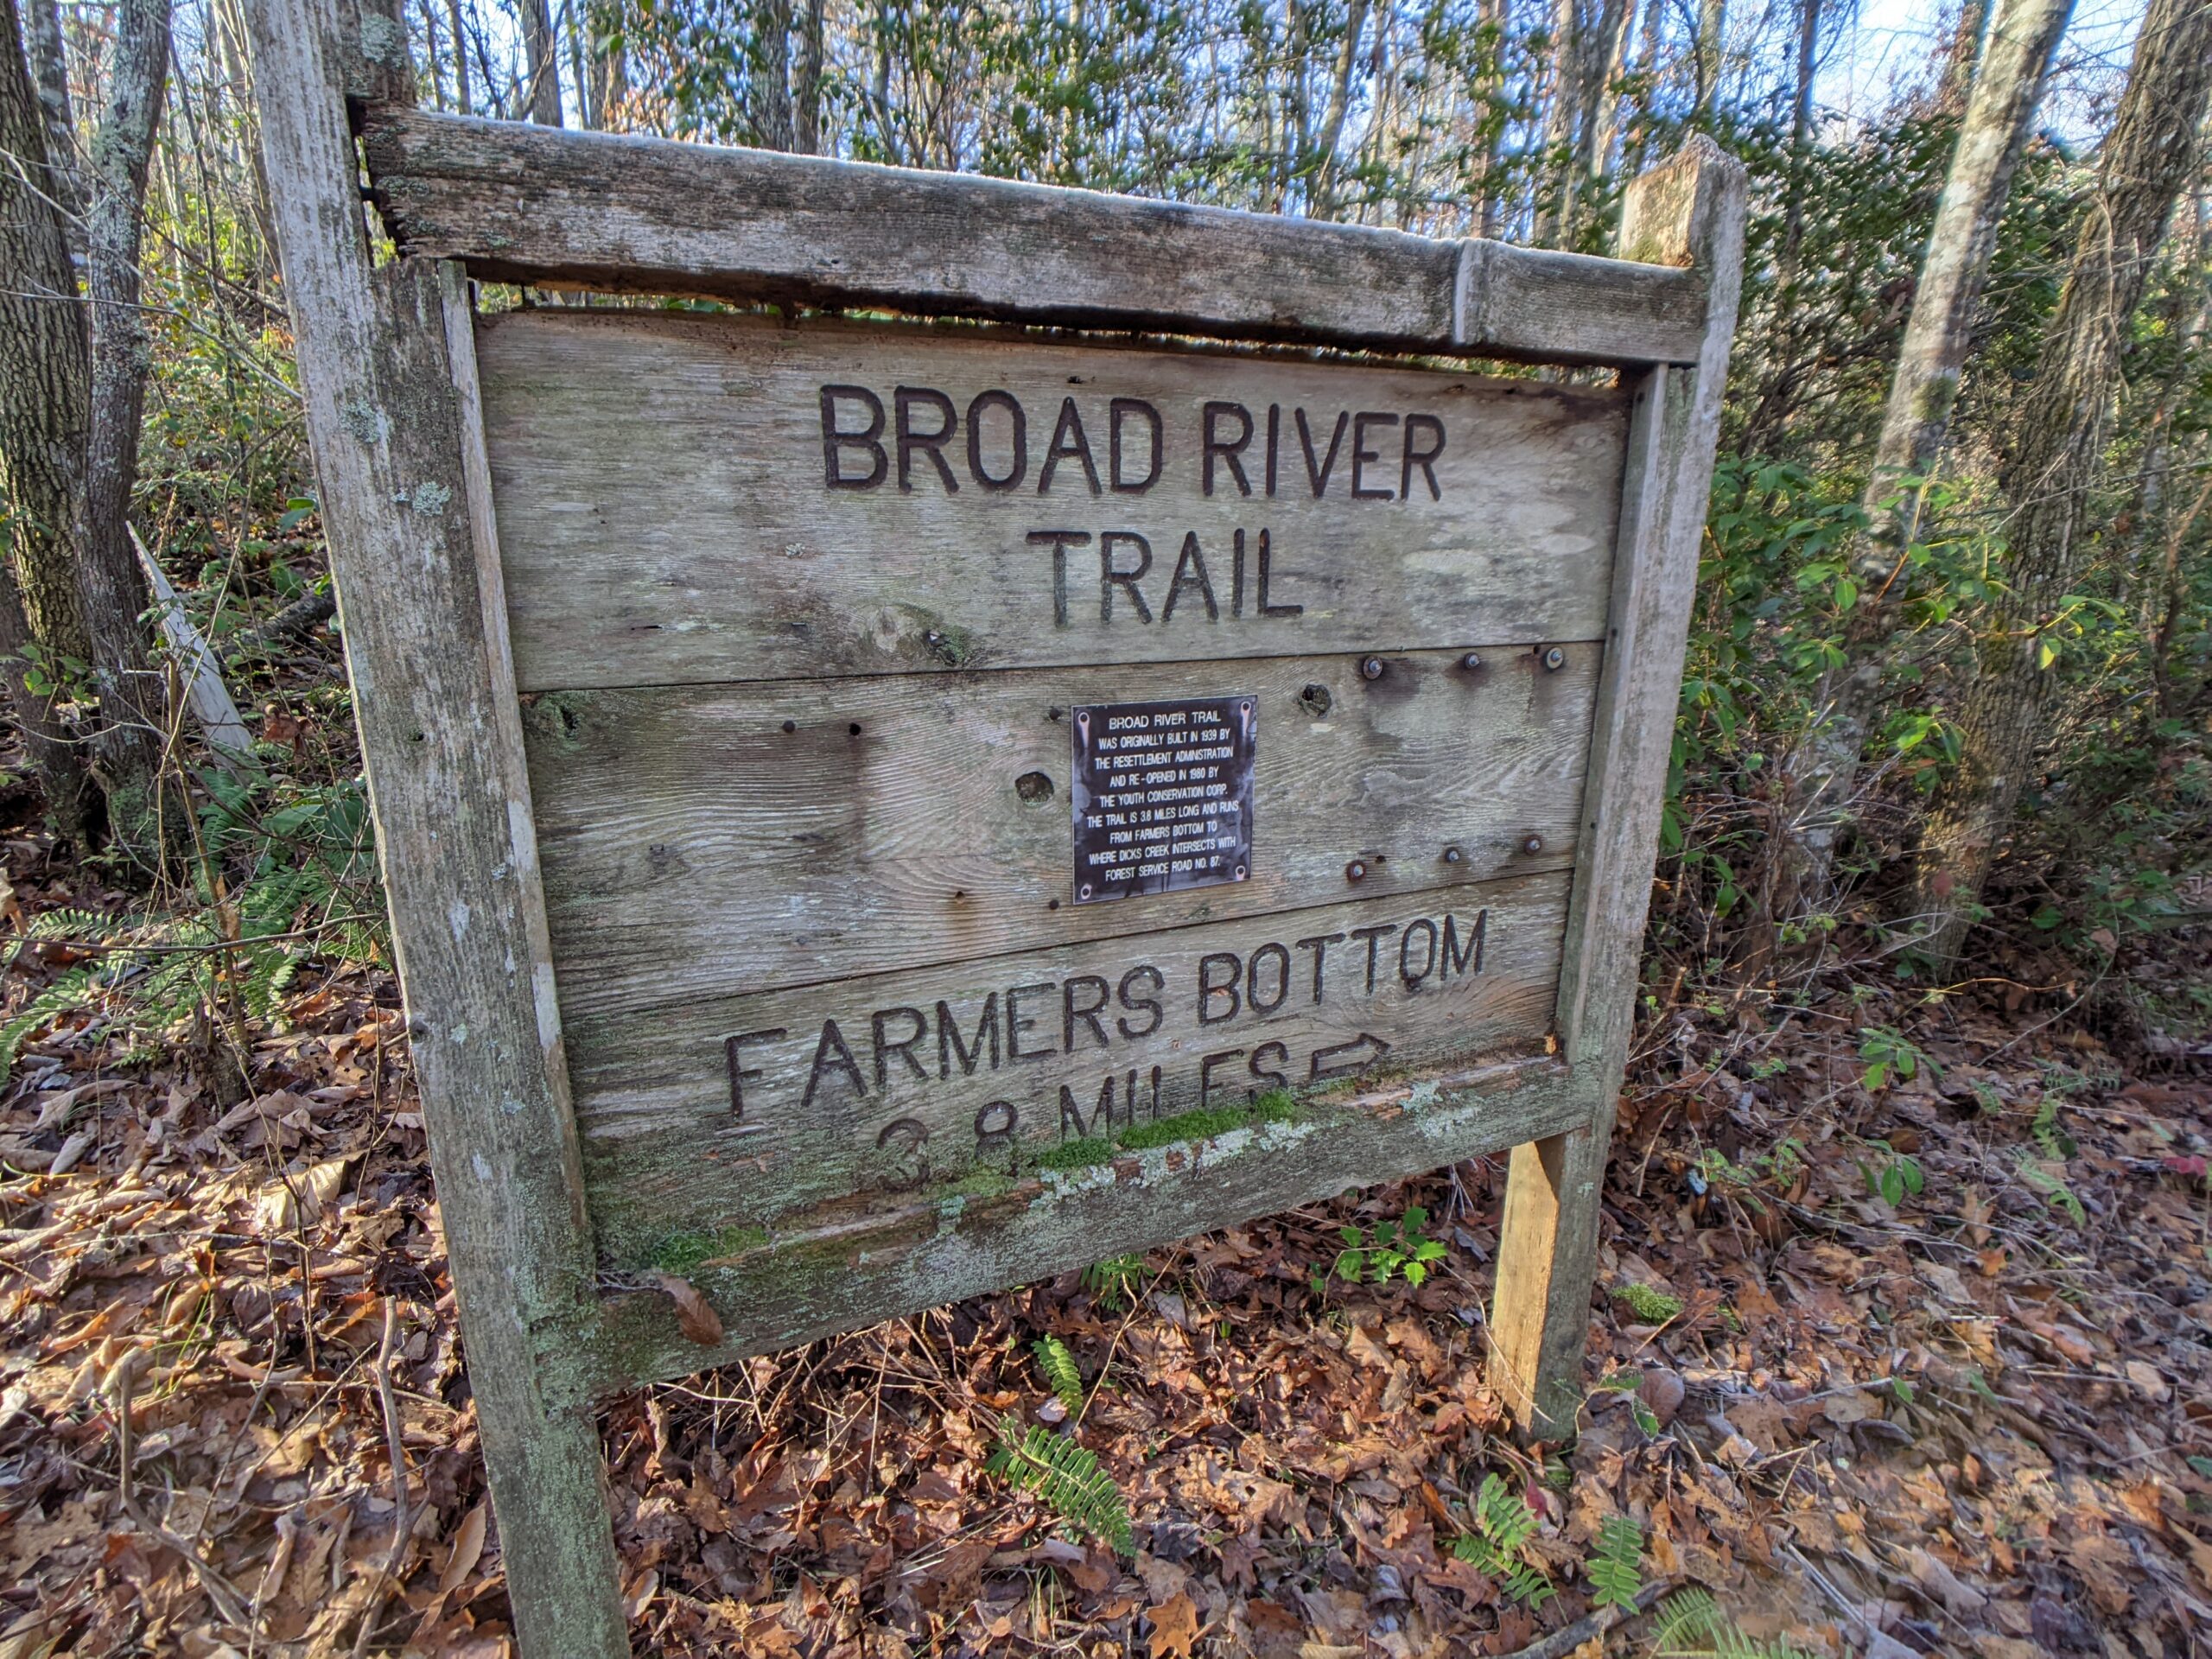 2022-12-01 Broad River Trail to Farmers Bottom and Back – Toccoa, Georgia